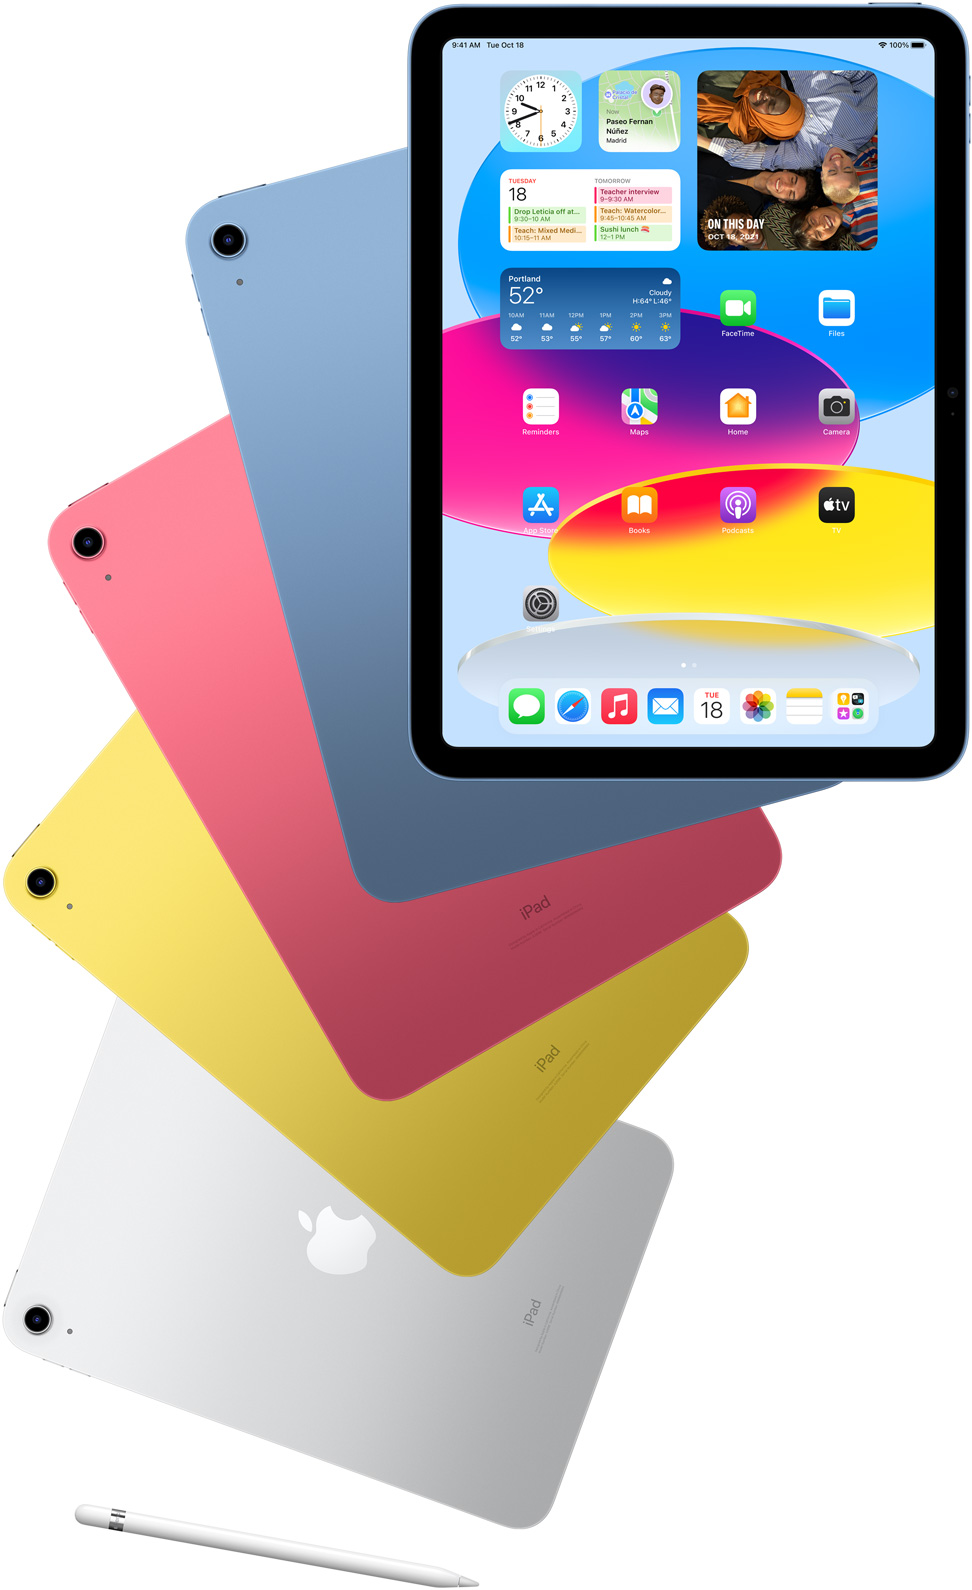 Front view iPad shows home screen with blue, pink, yellow, and silver rear facing iPads behind it. An Apple Pencil sits near the arranged iPad models.